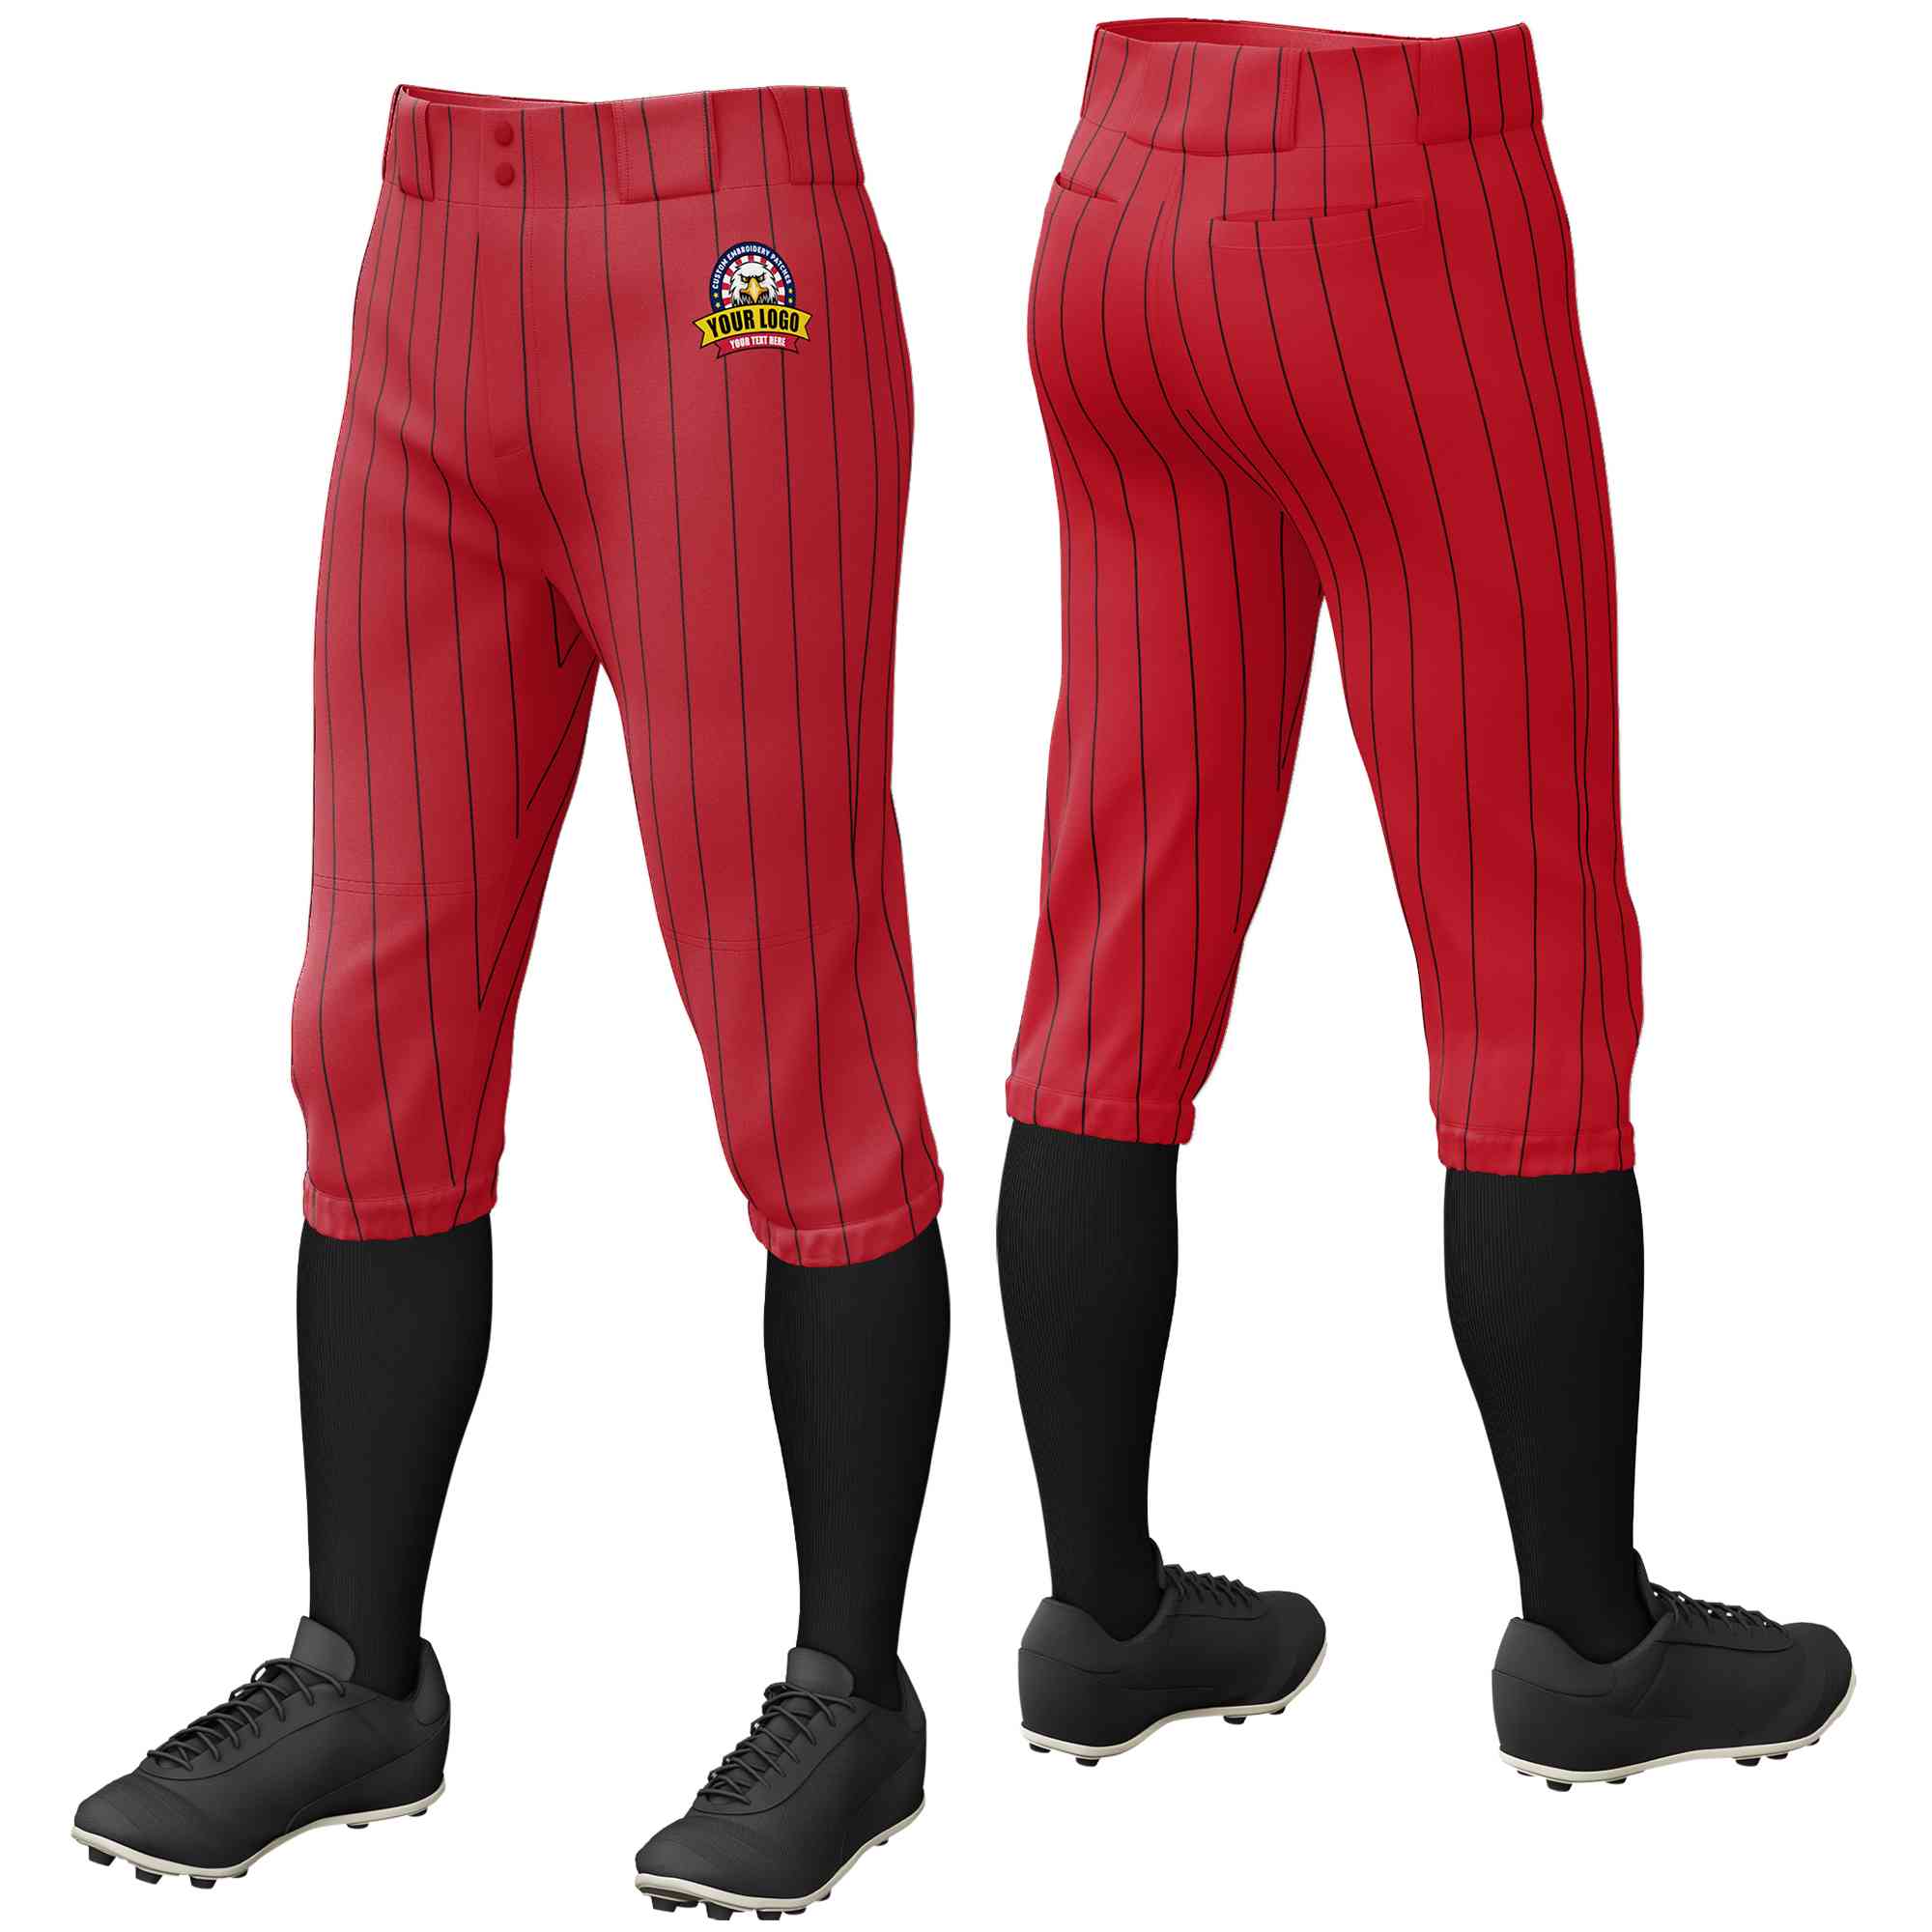 Custom Red Black Pinstripe Fit Stretch Practice Knickers Baseball Pant